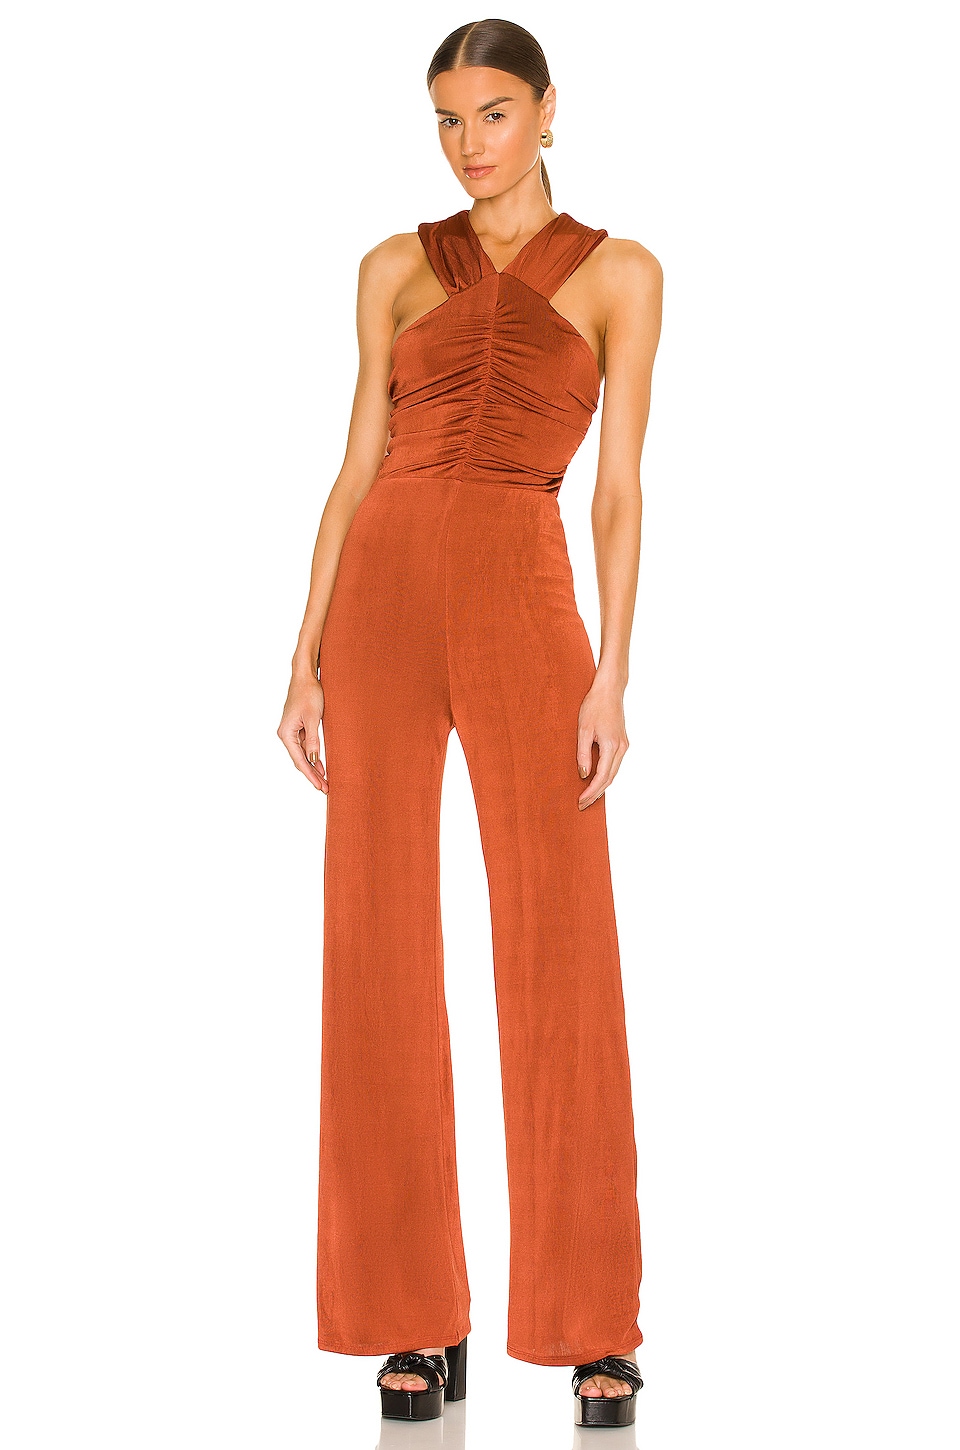 Burnt Orange and Rusty Brown Jumpsuit for Wedding Guest by House of Harlow